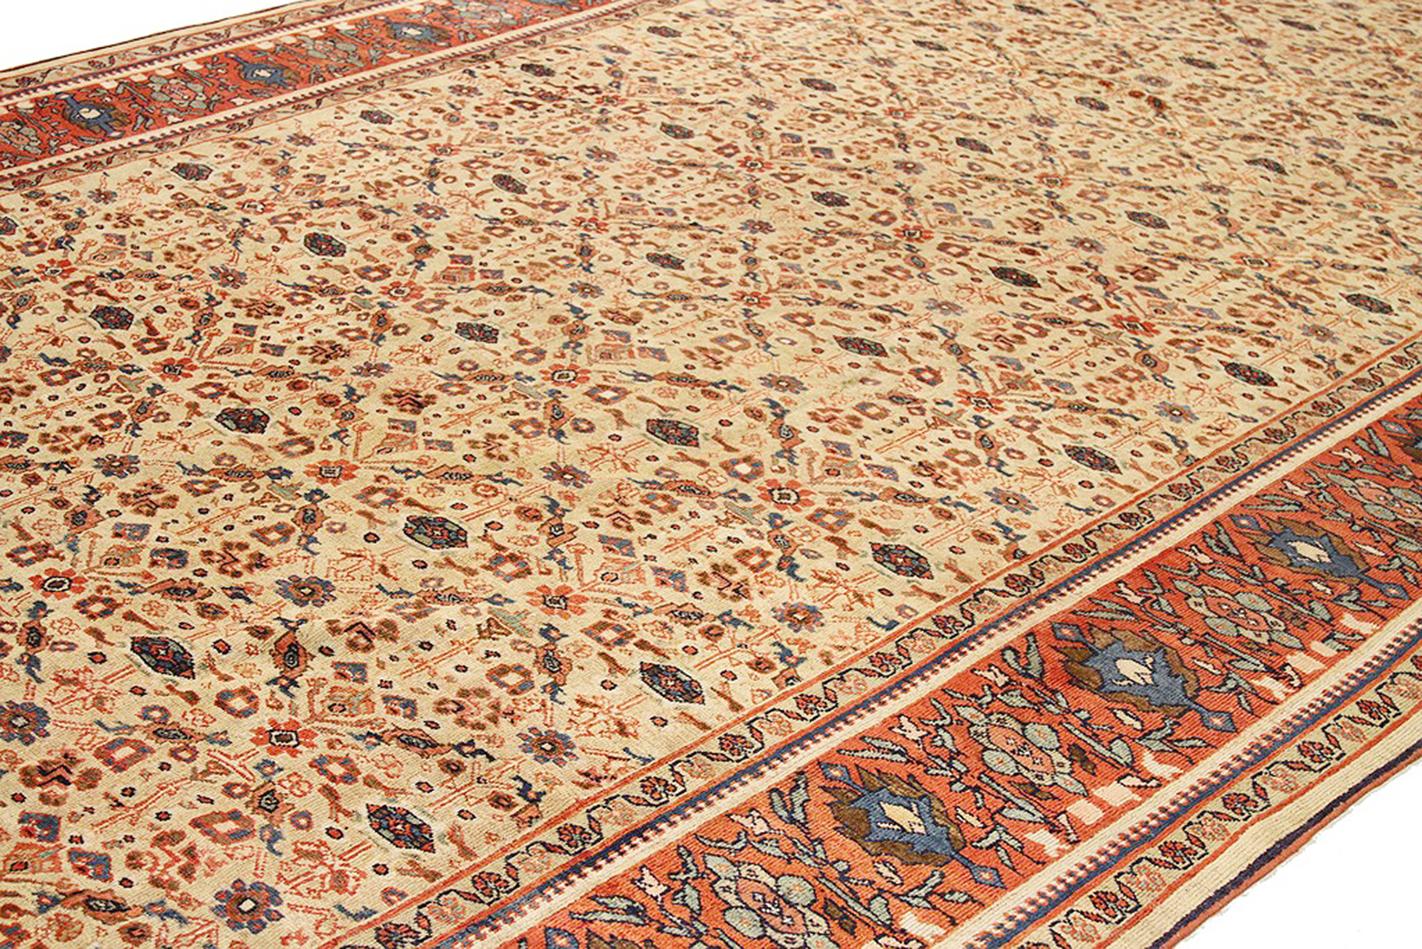 Islamic 1910 Antique Persian Sultanabad Rug with Navy & Red Floral Motif on Ivory Field For Sale